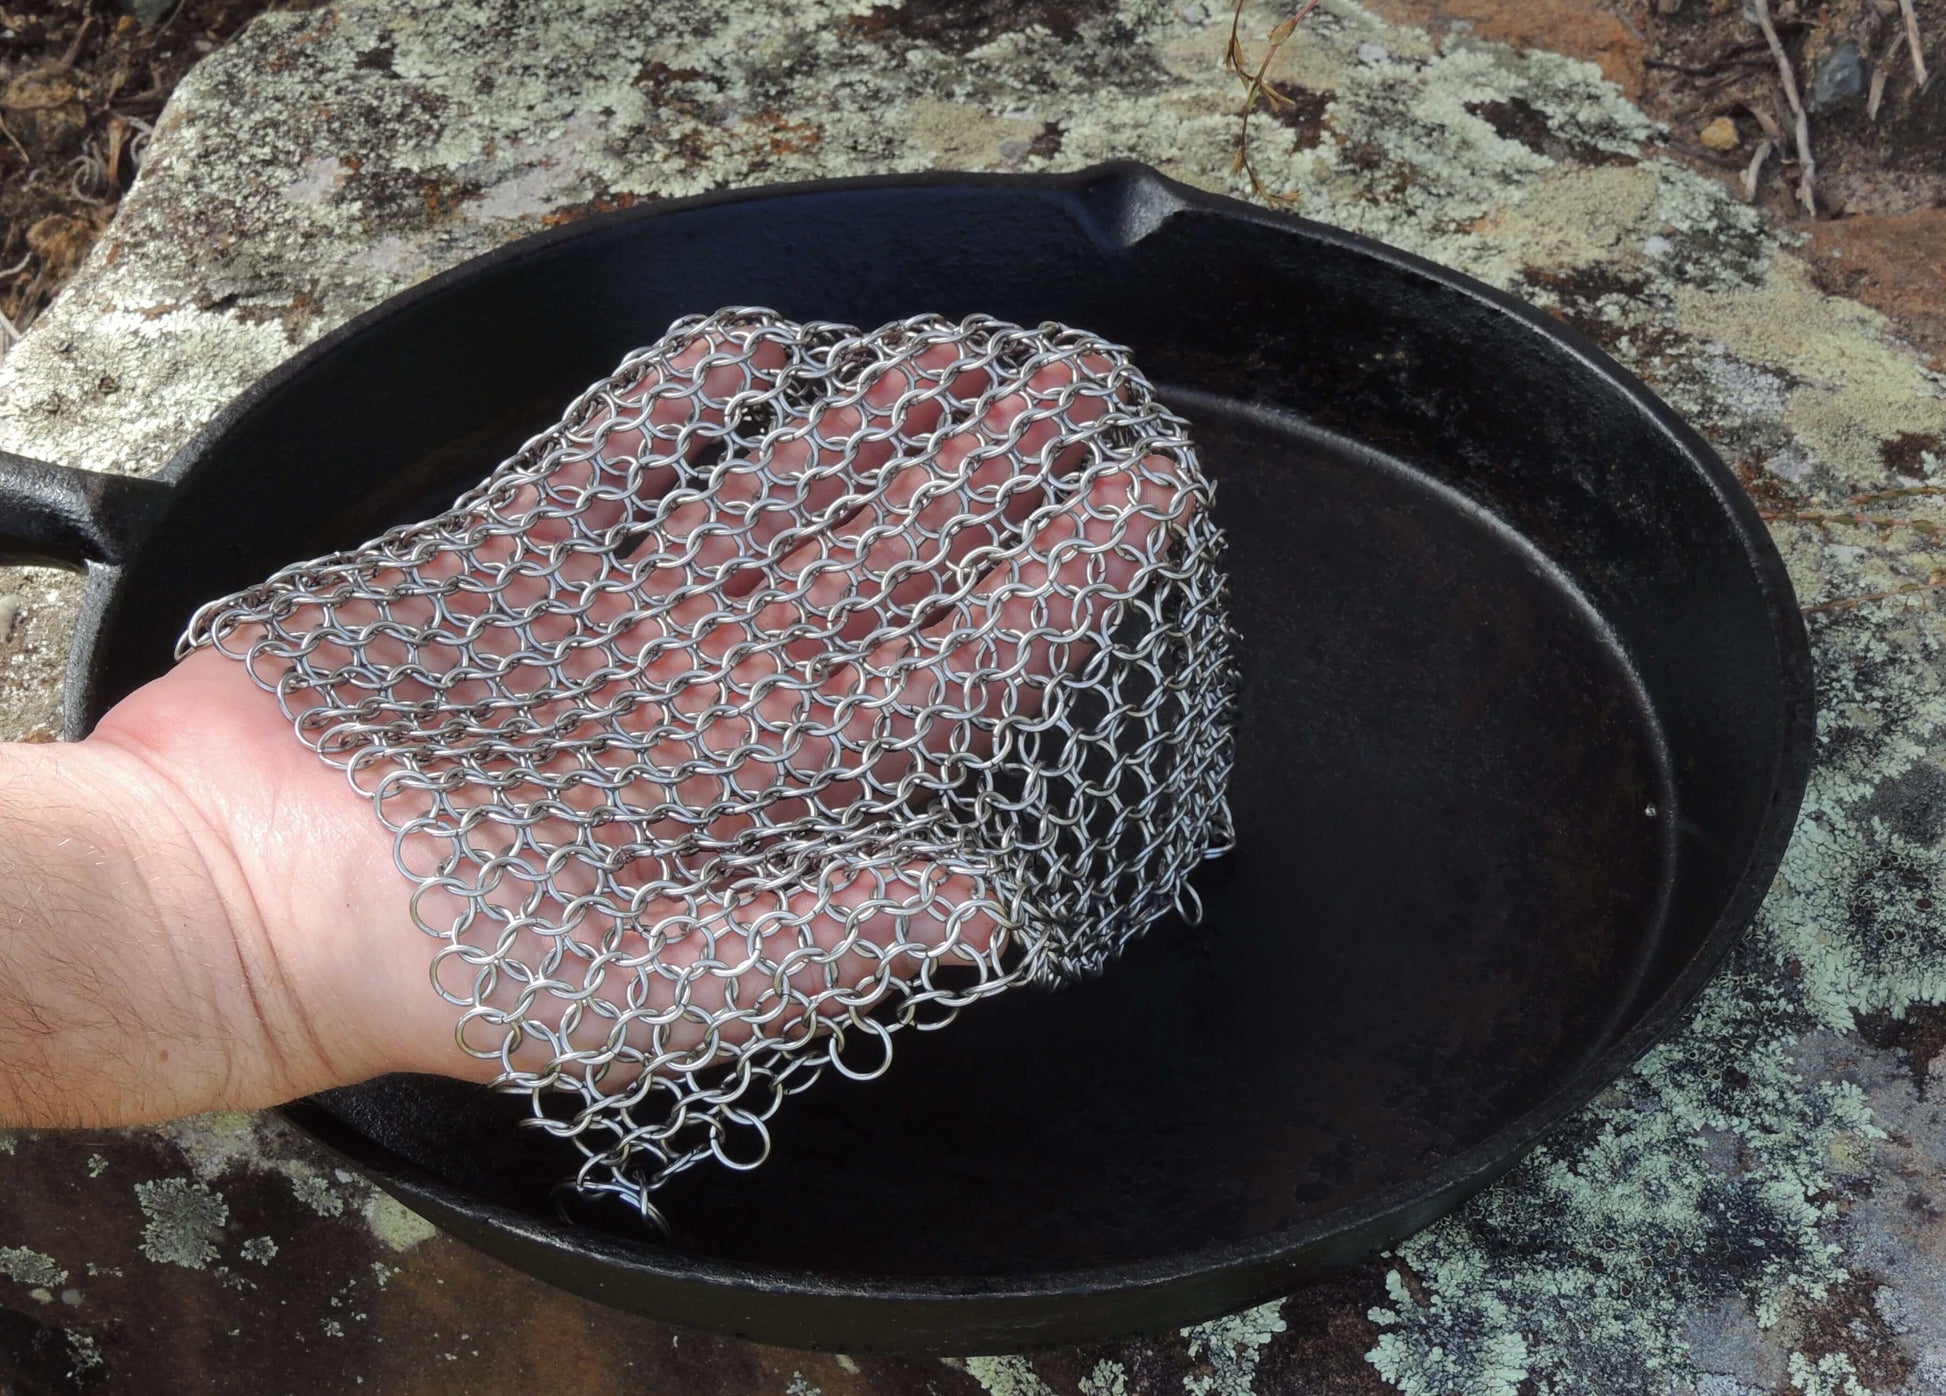 Kitcheniva Cast Iron Skillet Cleaner Chainmail Scrubber With